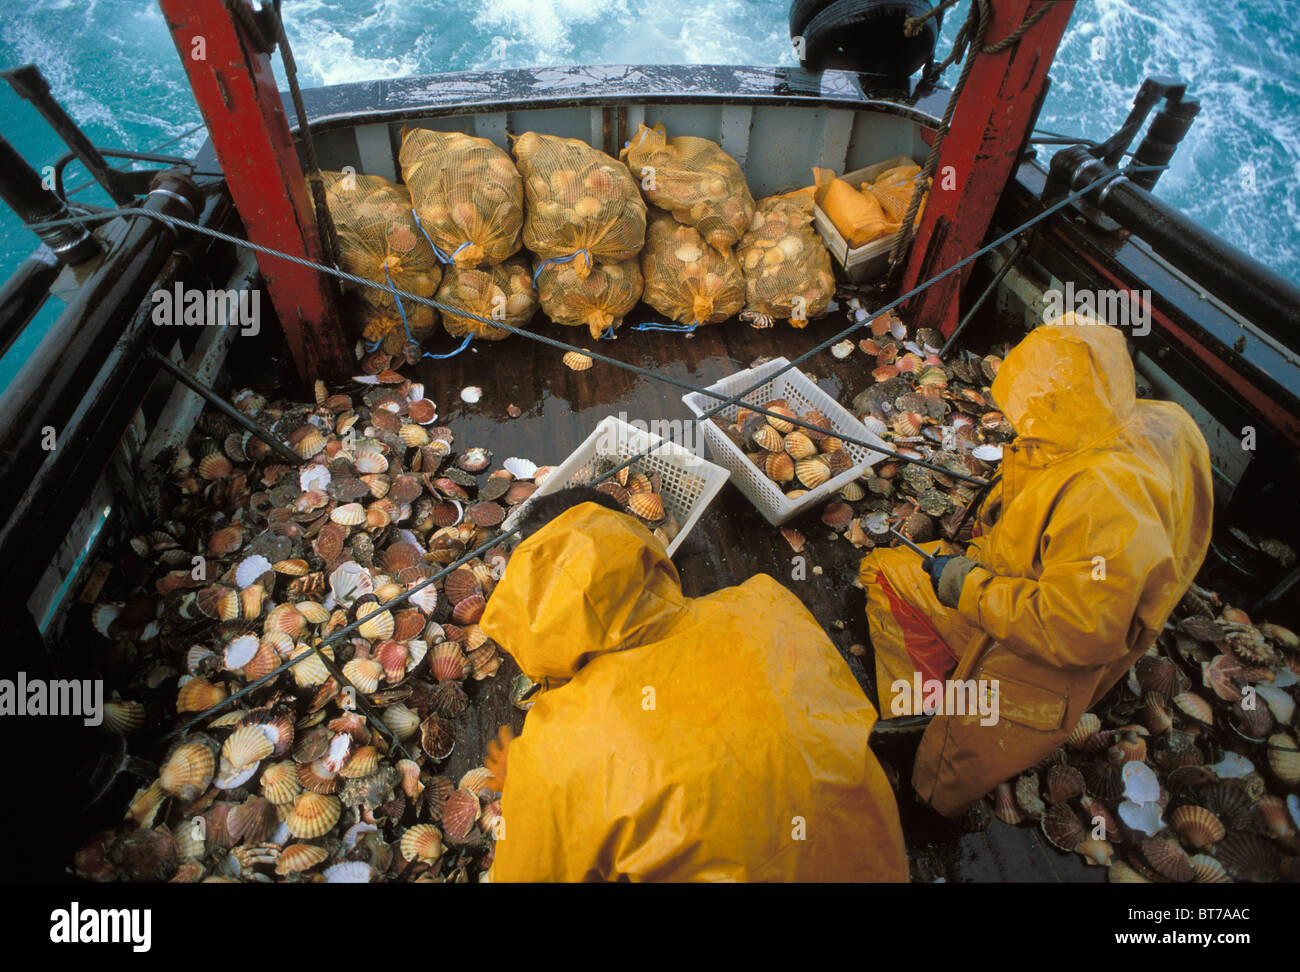 [Stock photo image of hundreds of scallops and two scallop fishers on the deck of a boat in the St Brieuc Bay.]